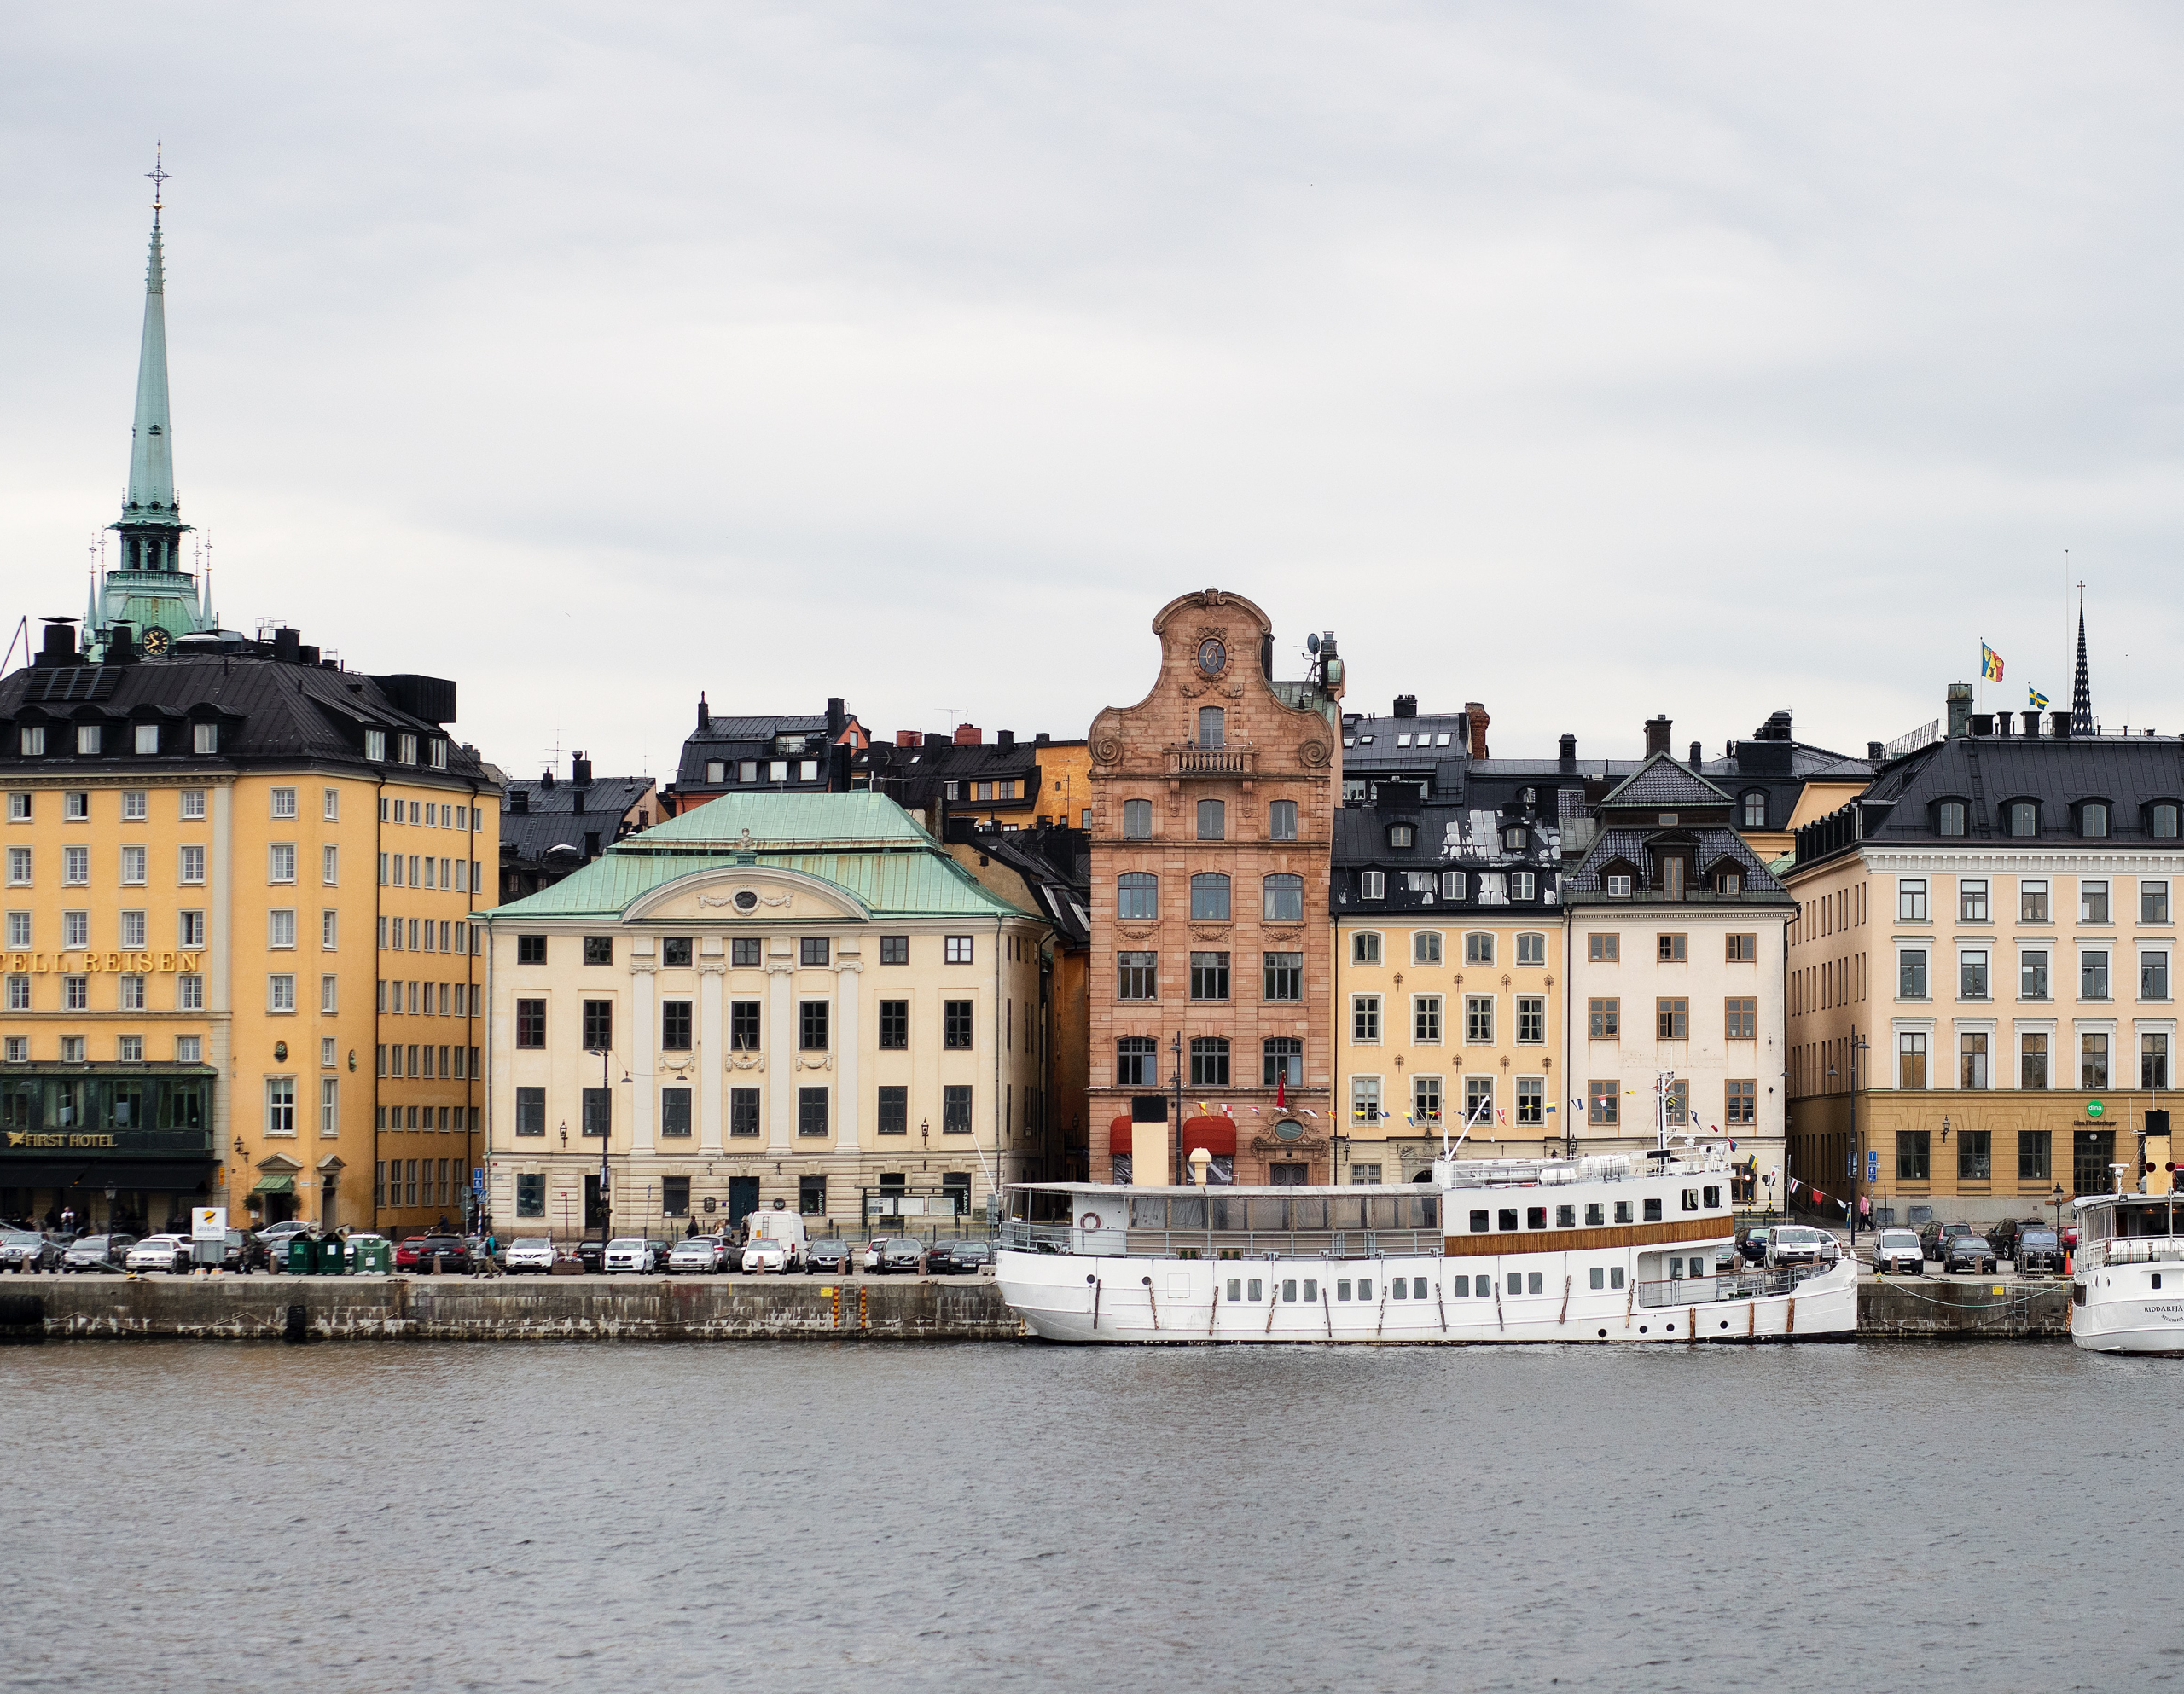 View from across the water of several buildings in downtown Stockholm, including the Prime Weber Shandwick offices